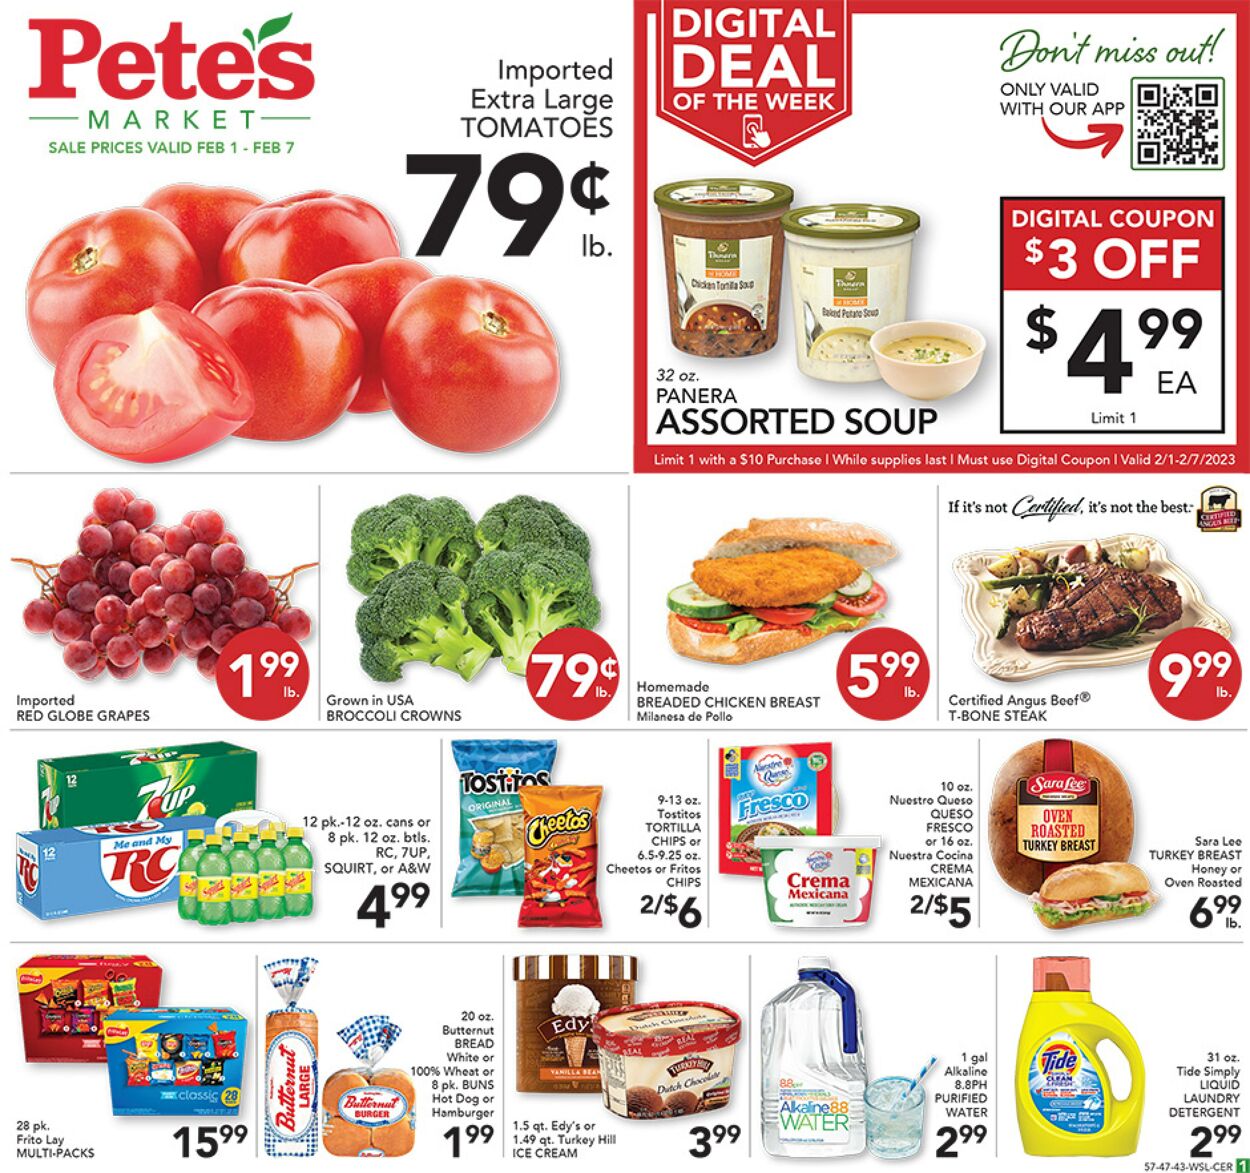 Pete's Fresh Market Promotional weekly ads